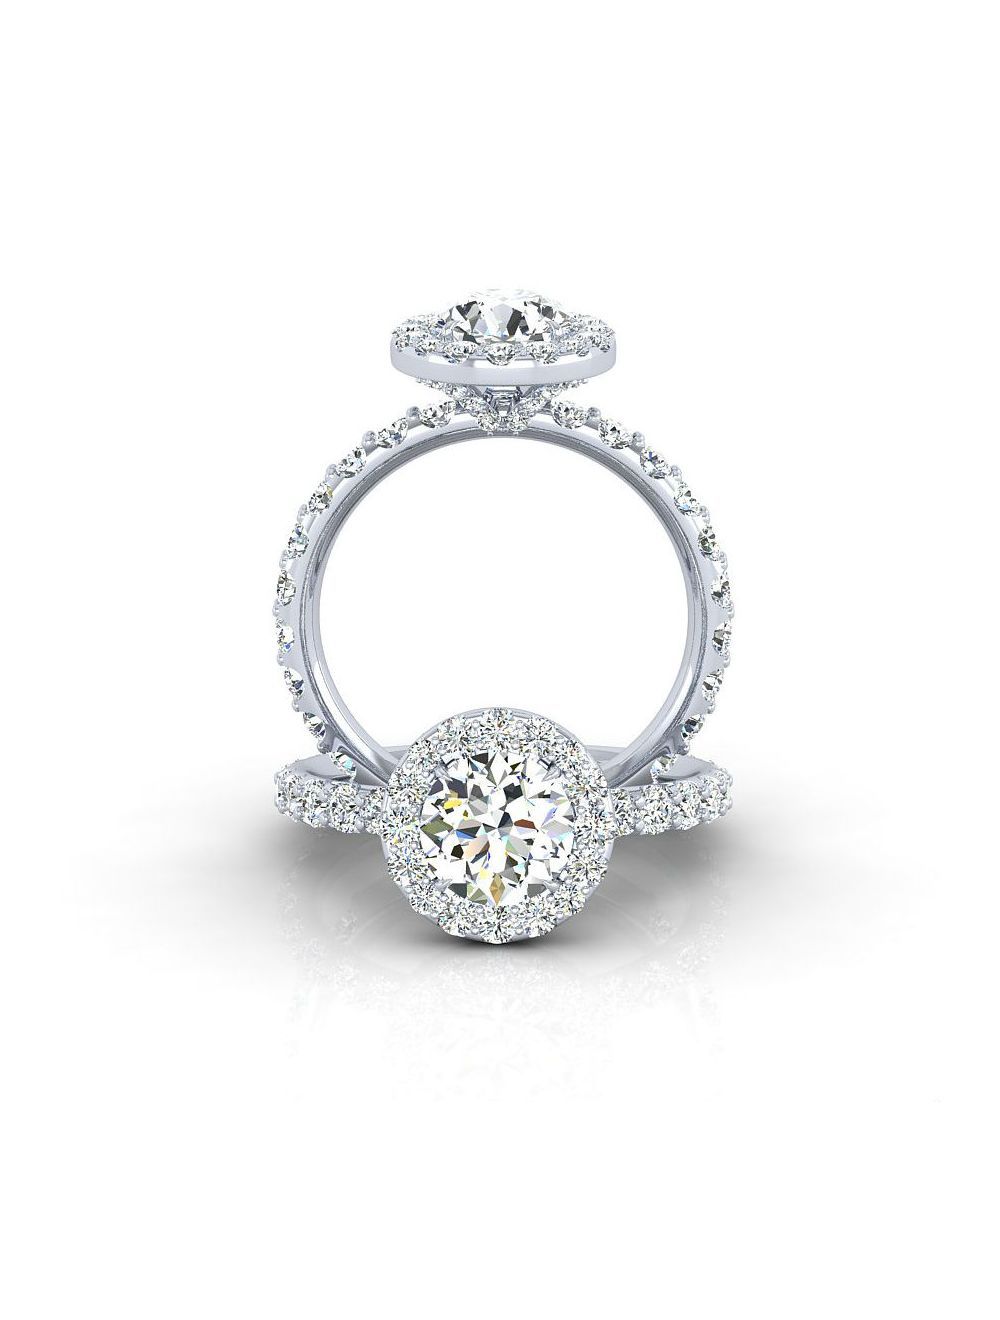 Round Halo Sparkle Diamond Engagement Ring With Regard To Most Recently Released Round Sparkle Halo Rings (View 7 of 25)